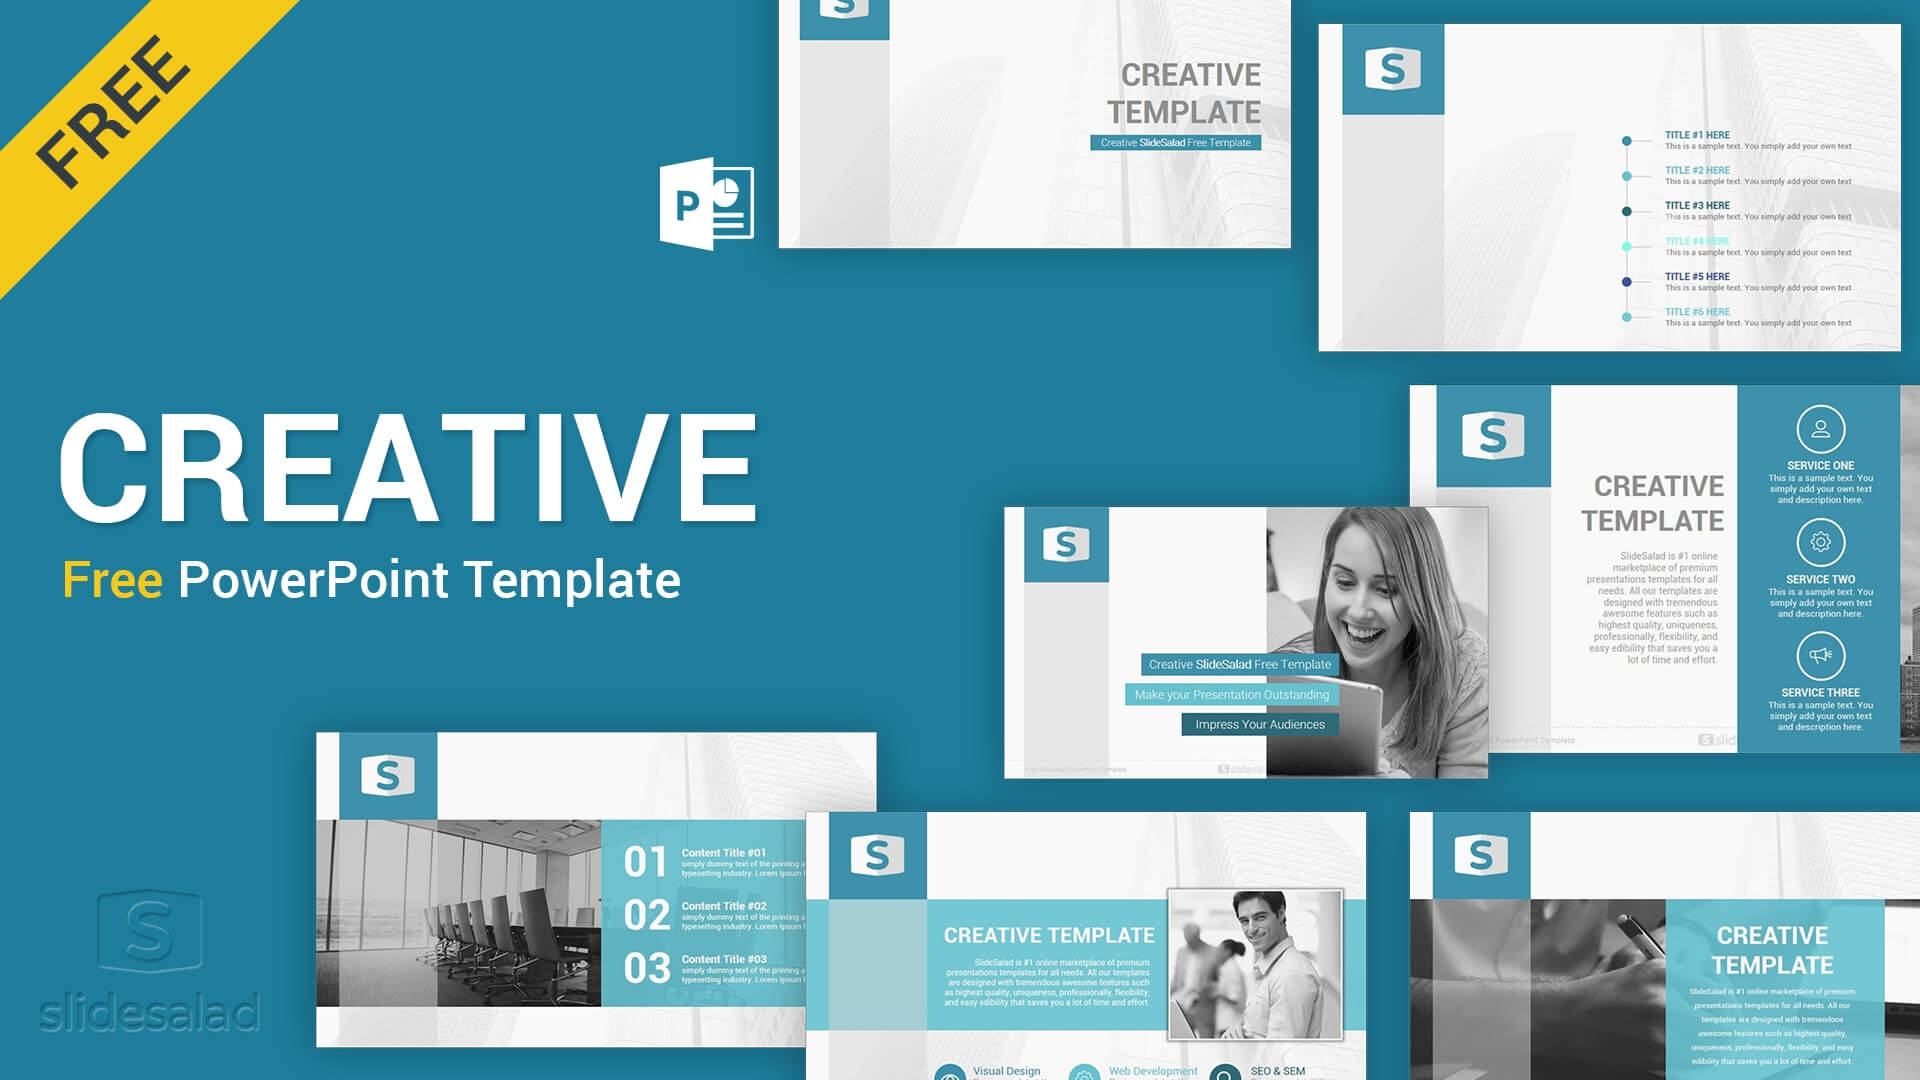 Creative Free Download Powerpoint Template – Slidesalad For Free Powerpoint Presentation Templates Downloads